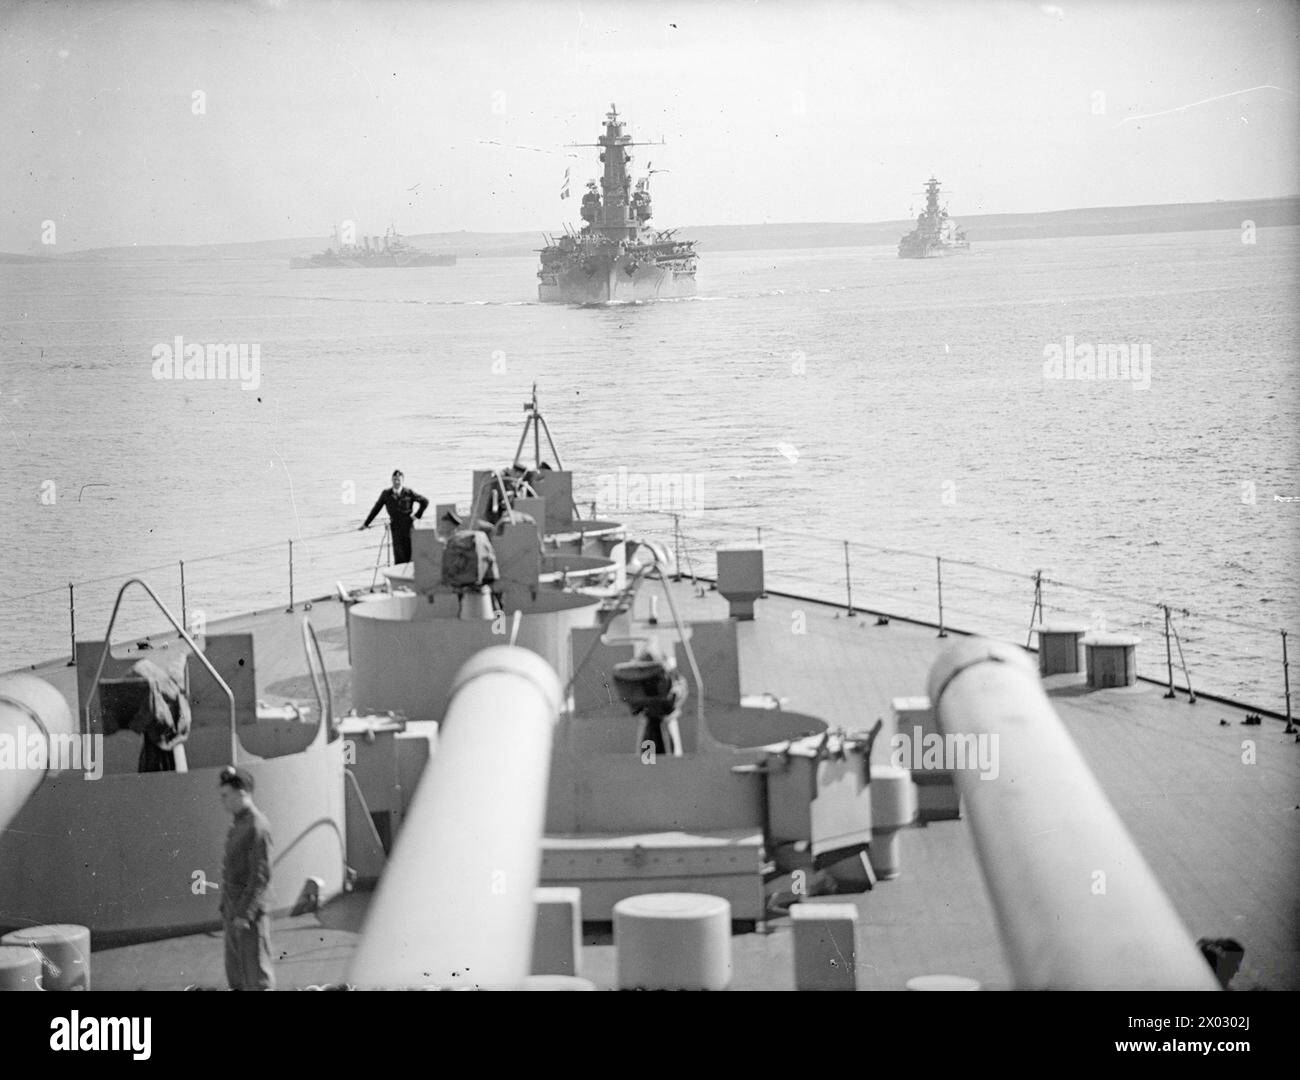 COMBINED BRITISH AND AMERICAN NAVAL FORCE PROTECT NORTHERN CONVOYS. JUNE 1943, ON BOARD HMS DUKE OF YORK. - The US battleship SOUTH DAKOTA (centre), ALABAMA, and HMS BERWICK as the force left base Stock Photo